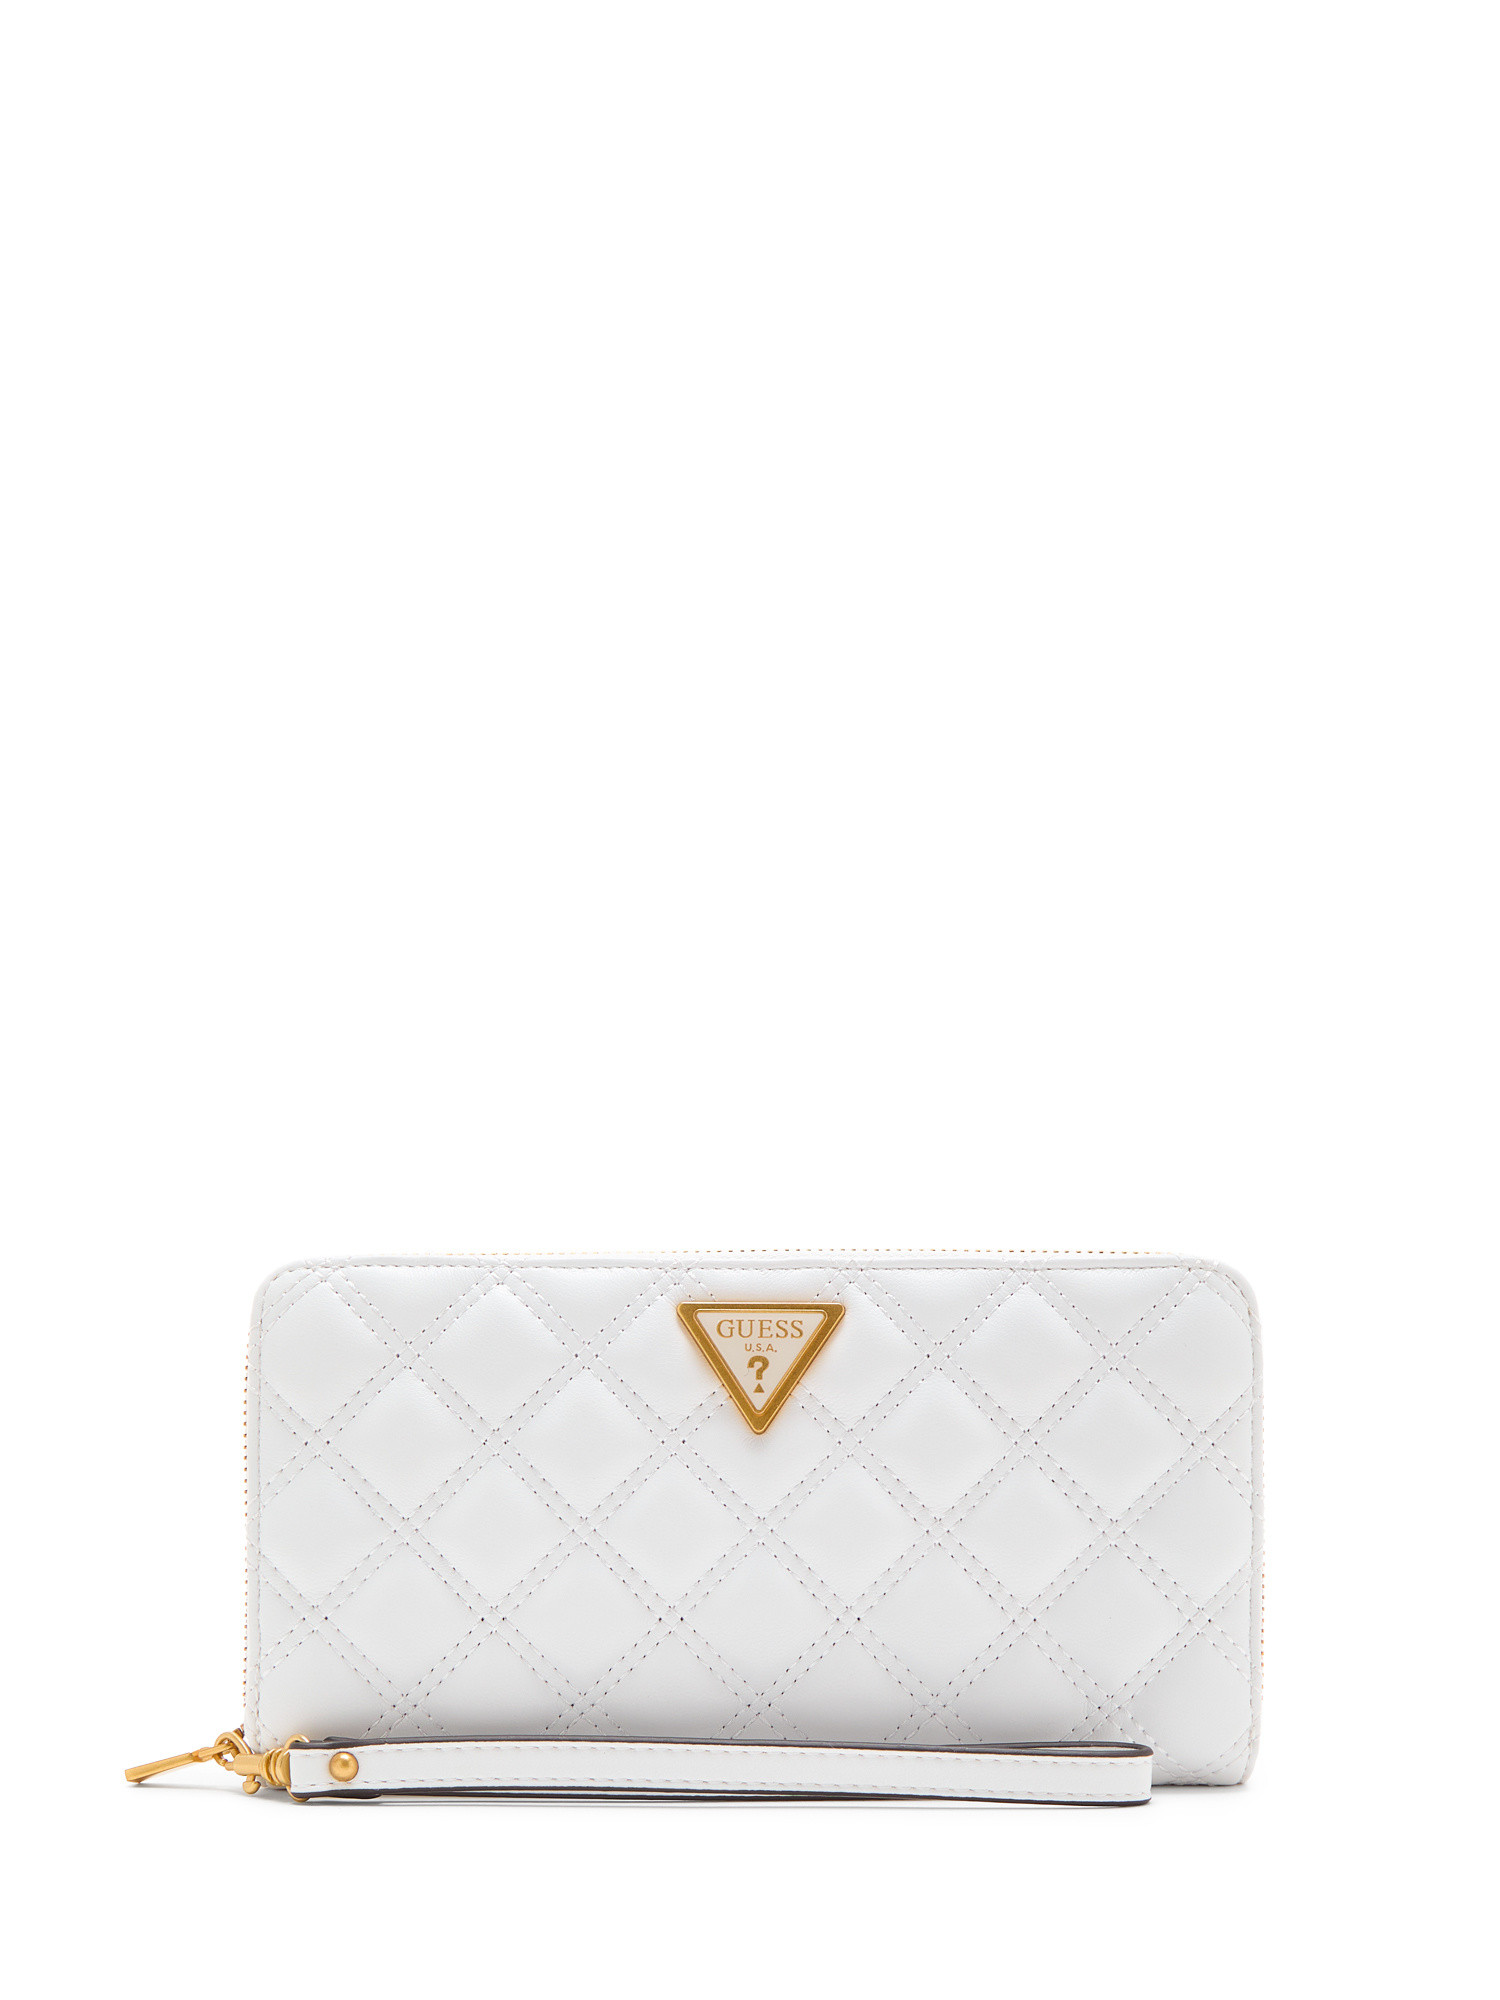 Guess - Giully maxi wallet, White, large image number 0